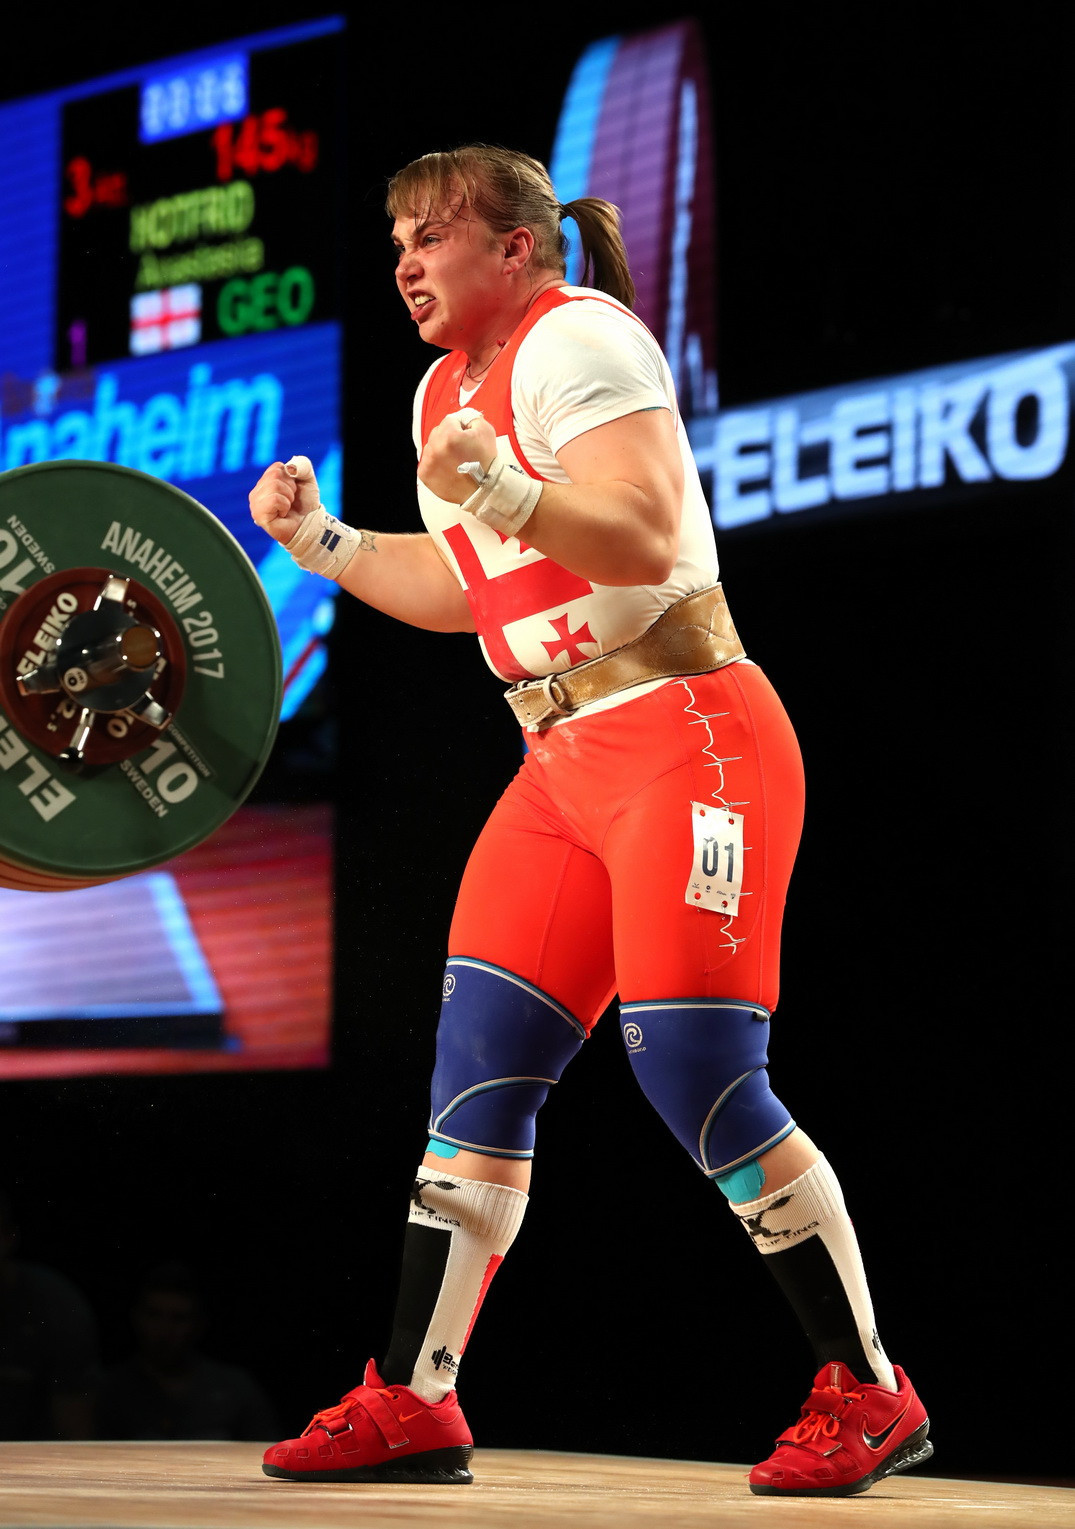 Anastasiia Hotfrid became Georgia’s first female medallist at the IWF World Championships on her way to winning the 90kg category ©IWF